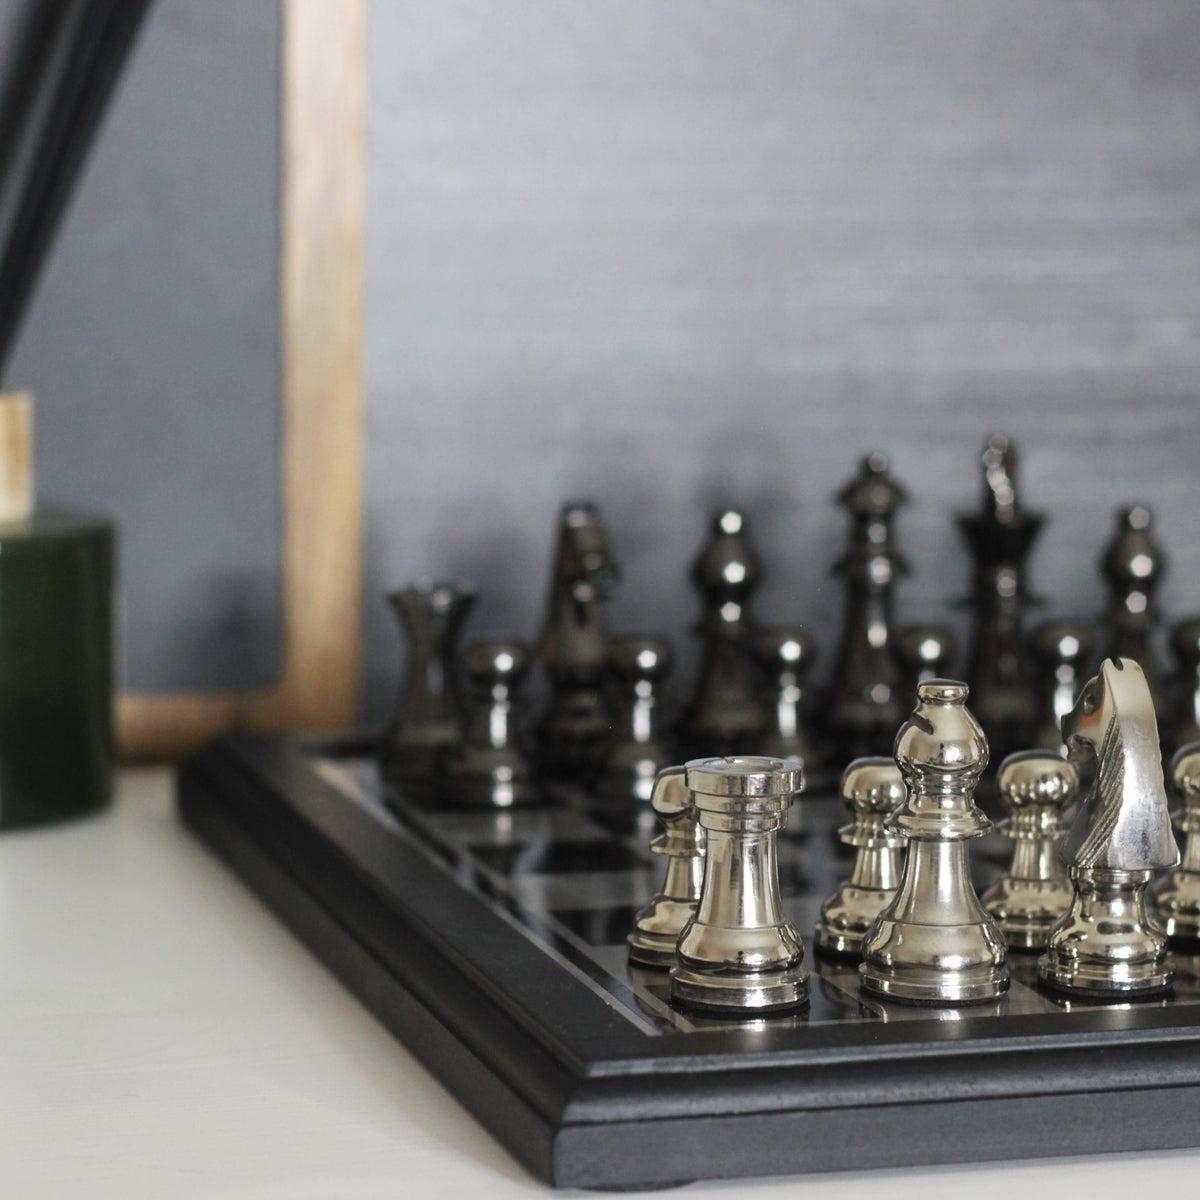 Vintage Black and Silver Metallic Chess Set – Marble Cultures